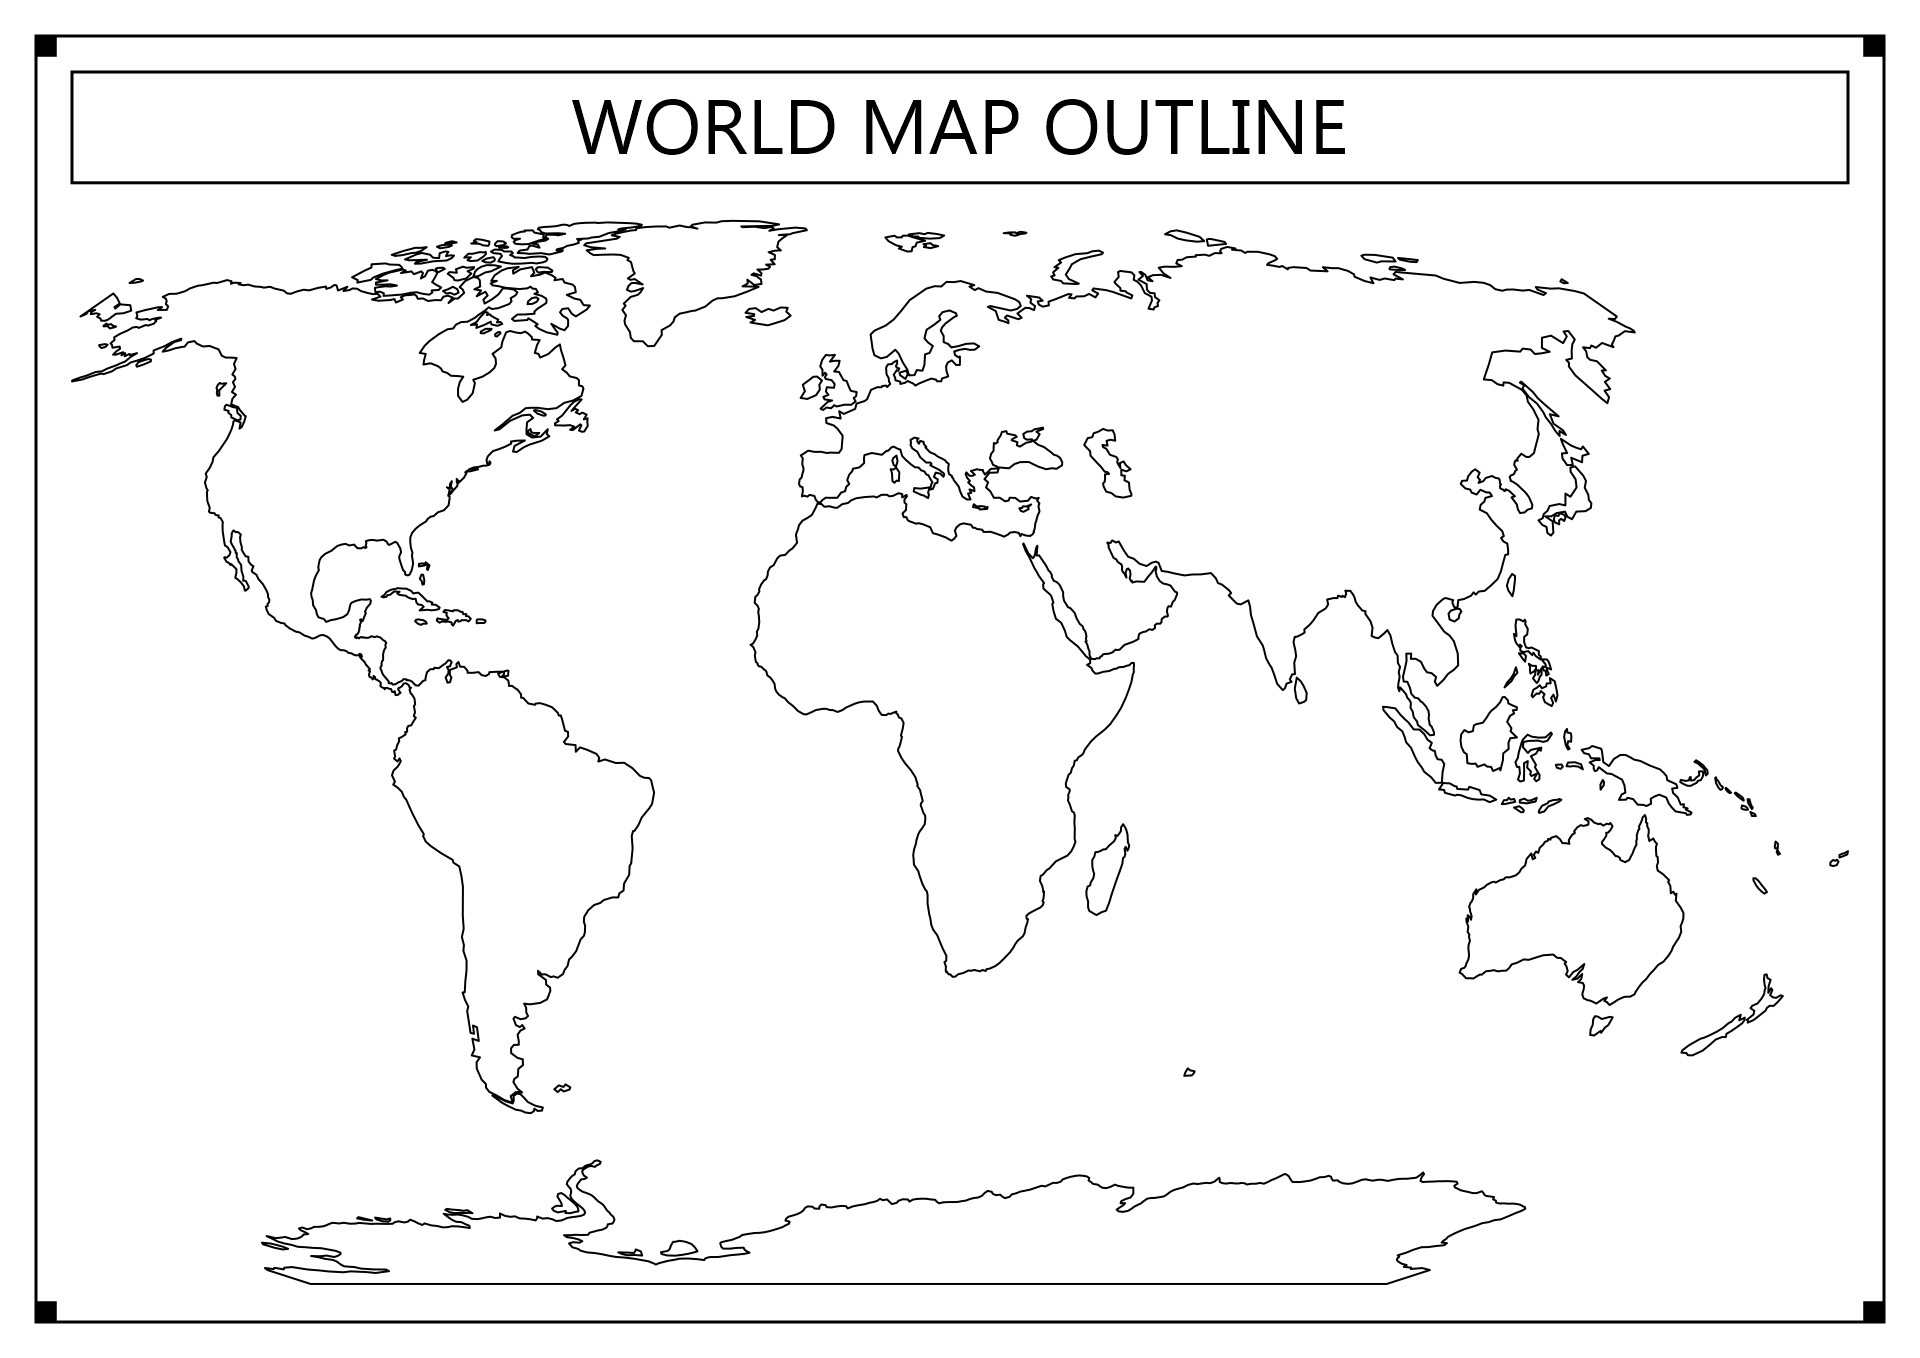 World Map Outline Continents Image